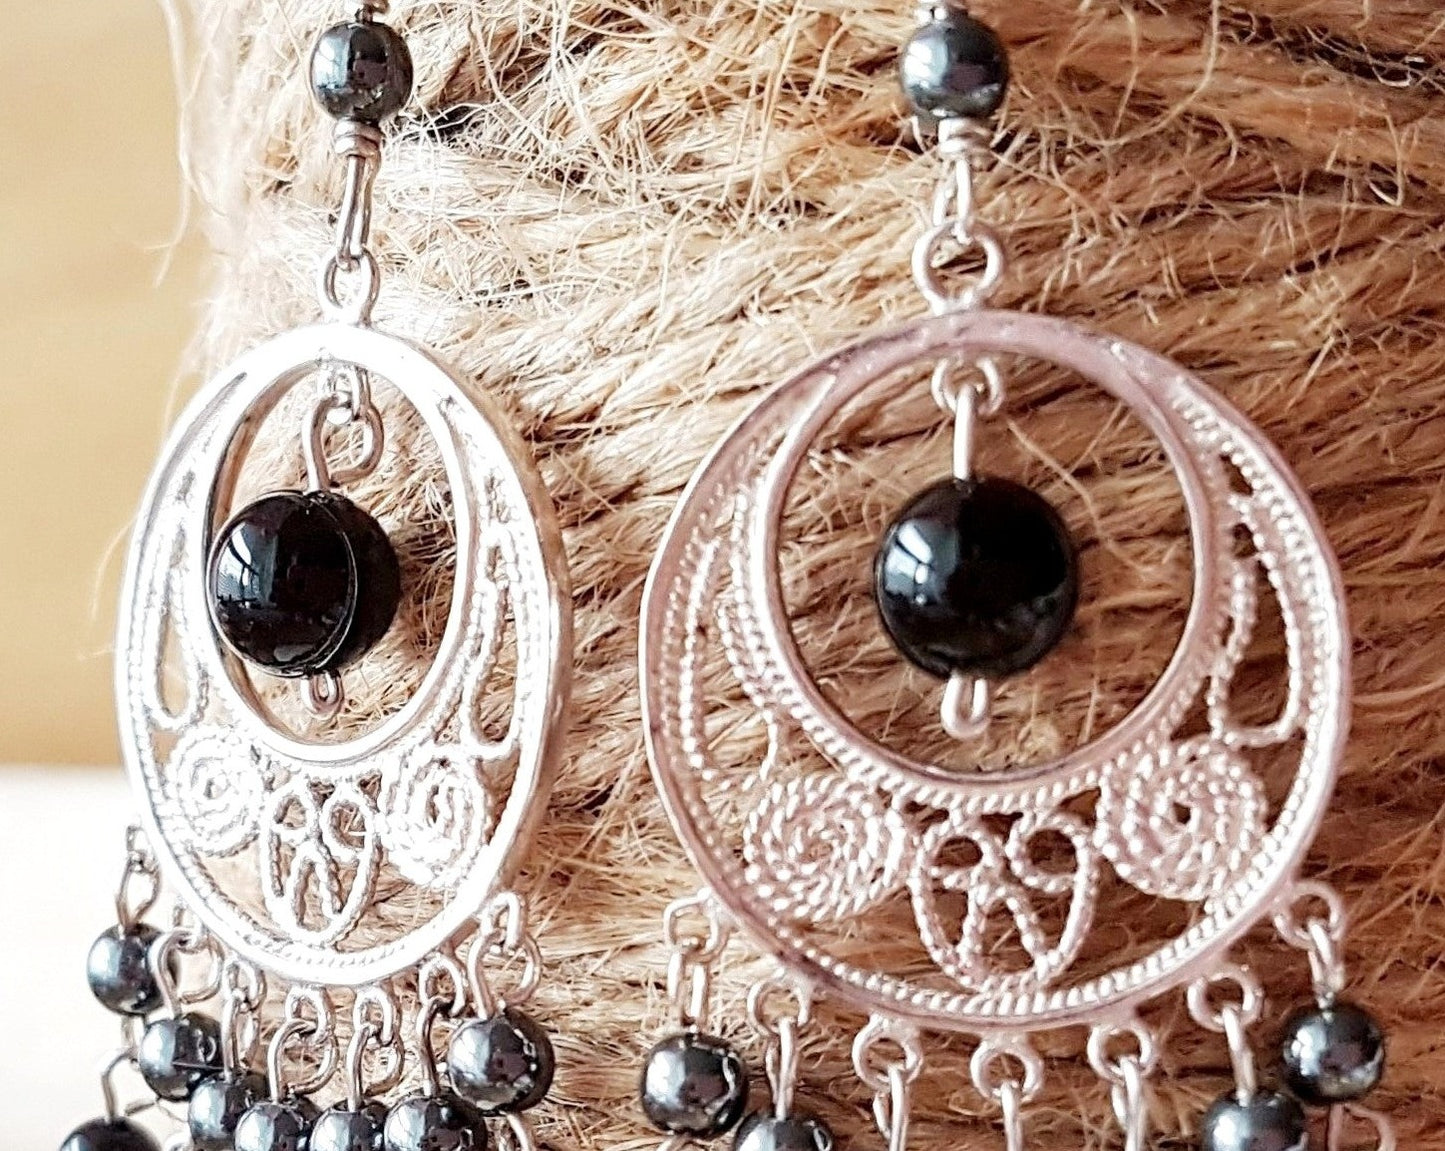 Long Decorative Black Onyx Hematite Chandelier Earrings with Filigree Sterling Silver design and long dangling streams of small round black onyx and hematite beads